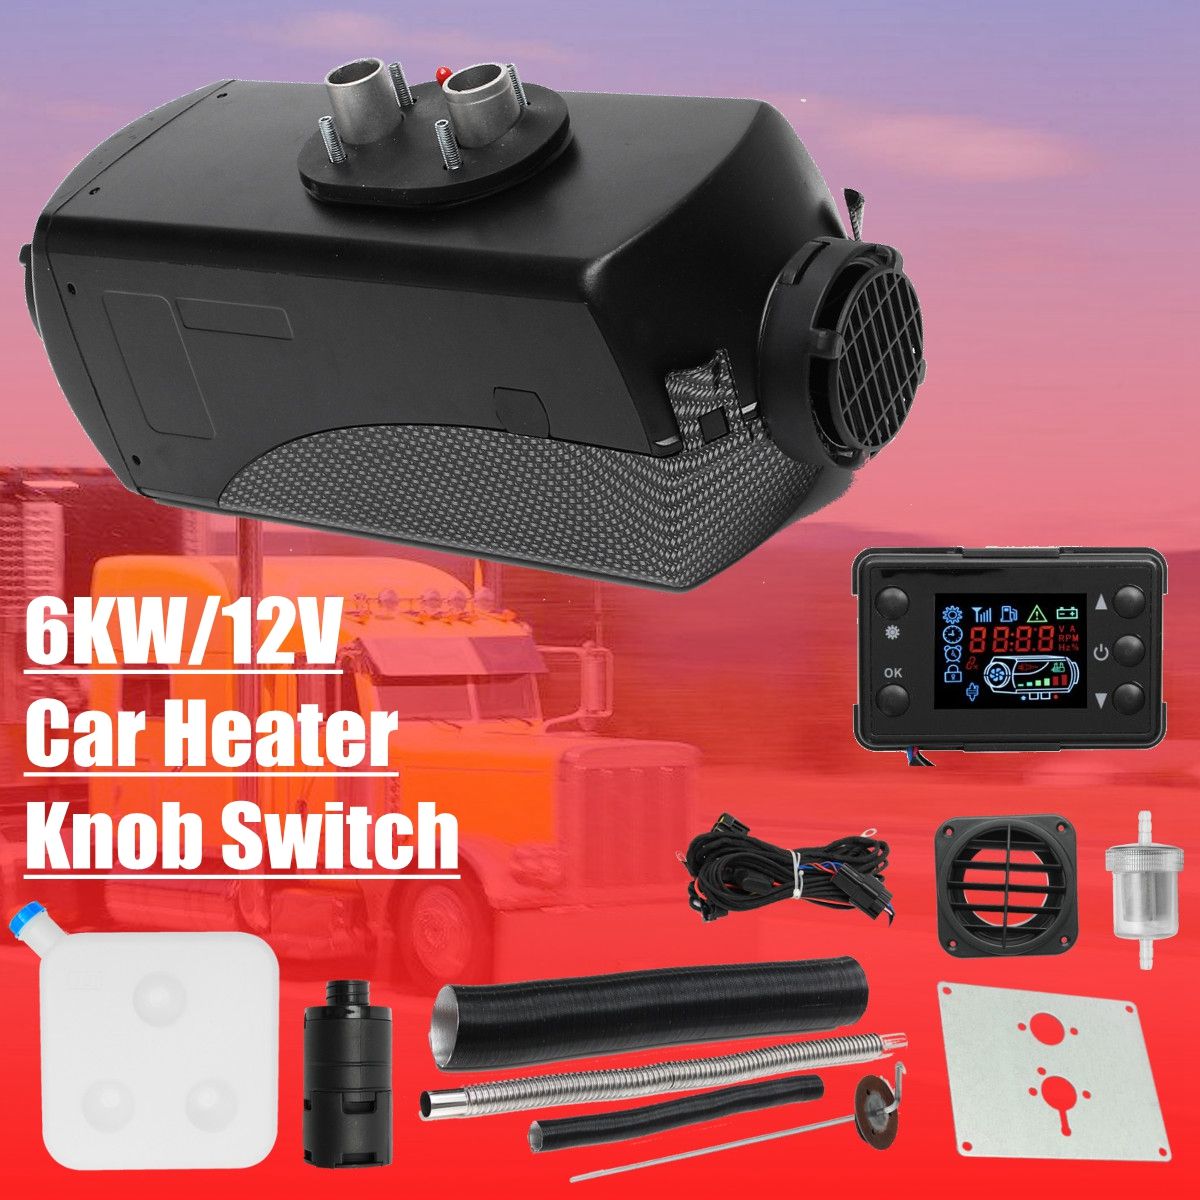 HCalory-6KW-12V-LCD-Parking-Car-Heater-With-3-Way-2-Tube-2-Air-Outlet-Silencer-Remote-Control-1336205